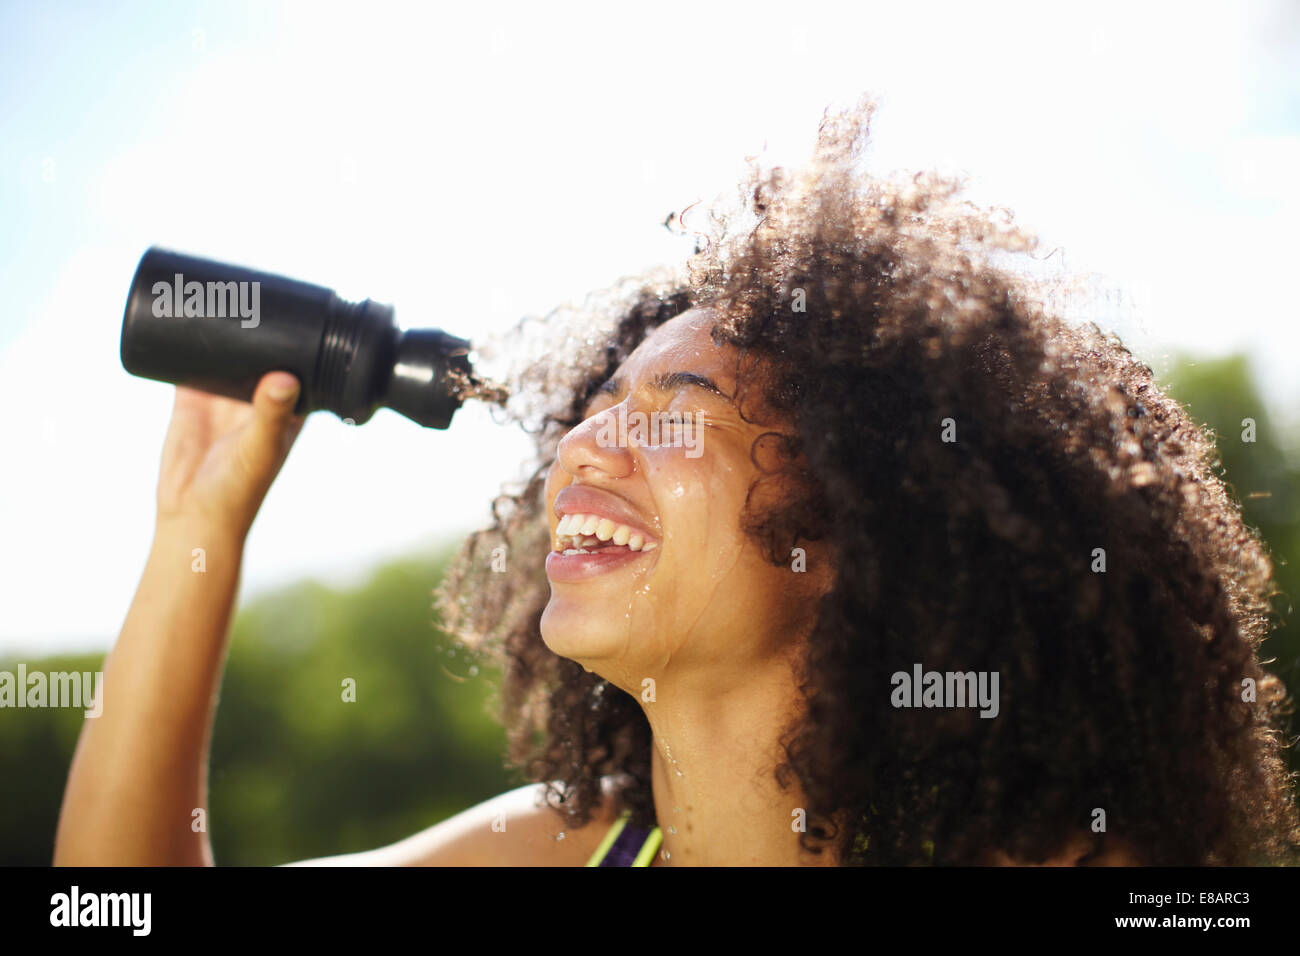 Young woman pouring water onto face in park Stock Photo